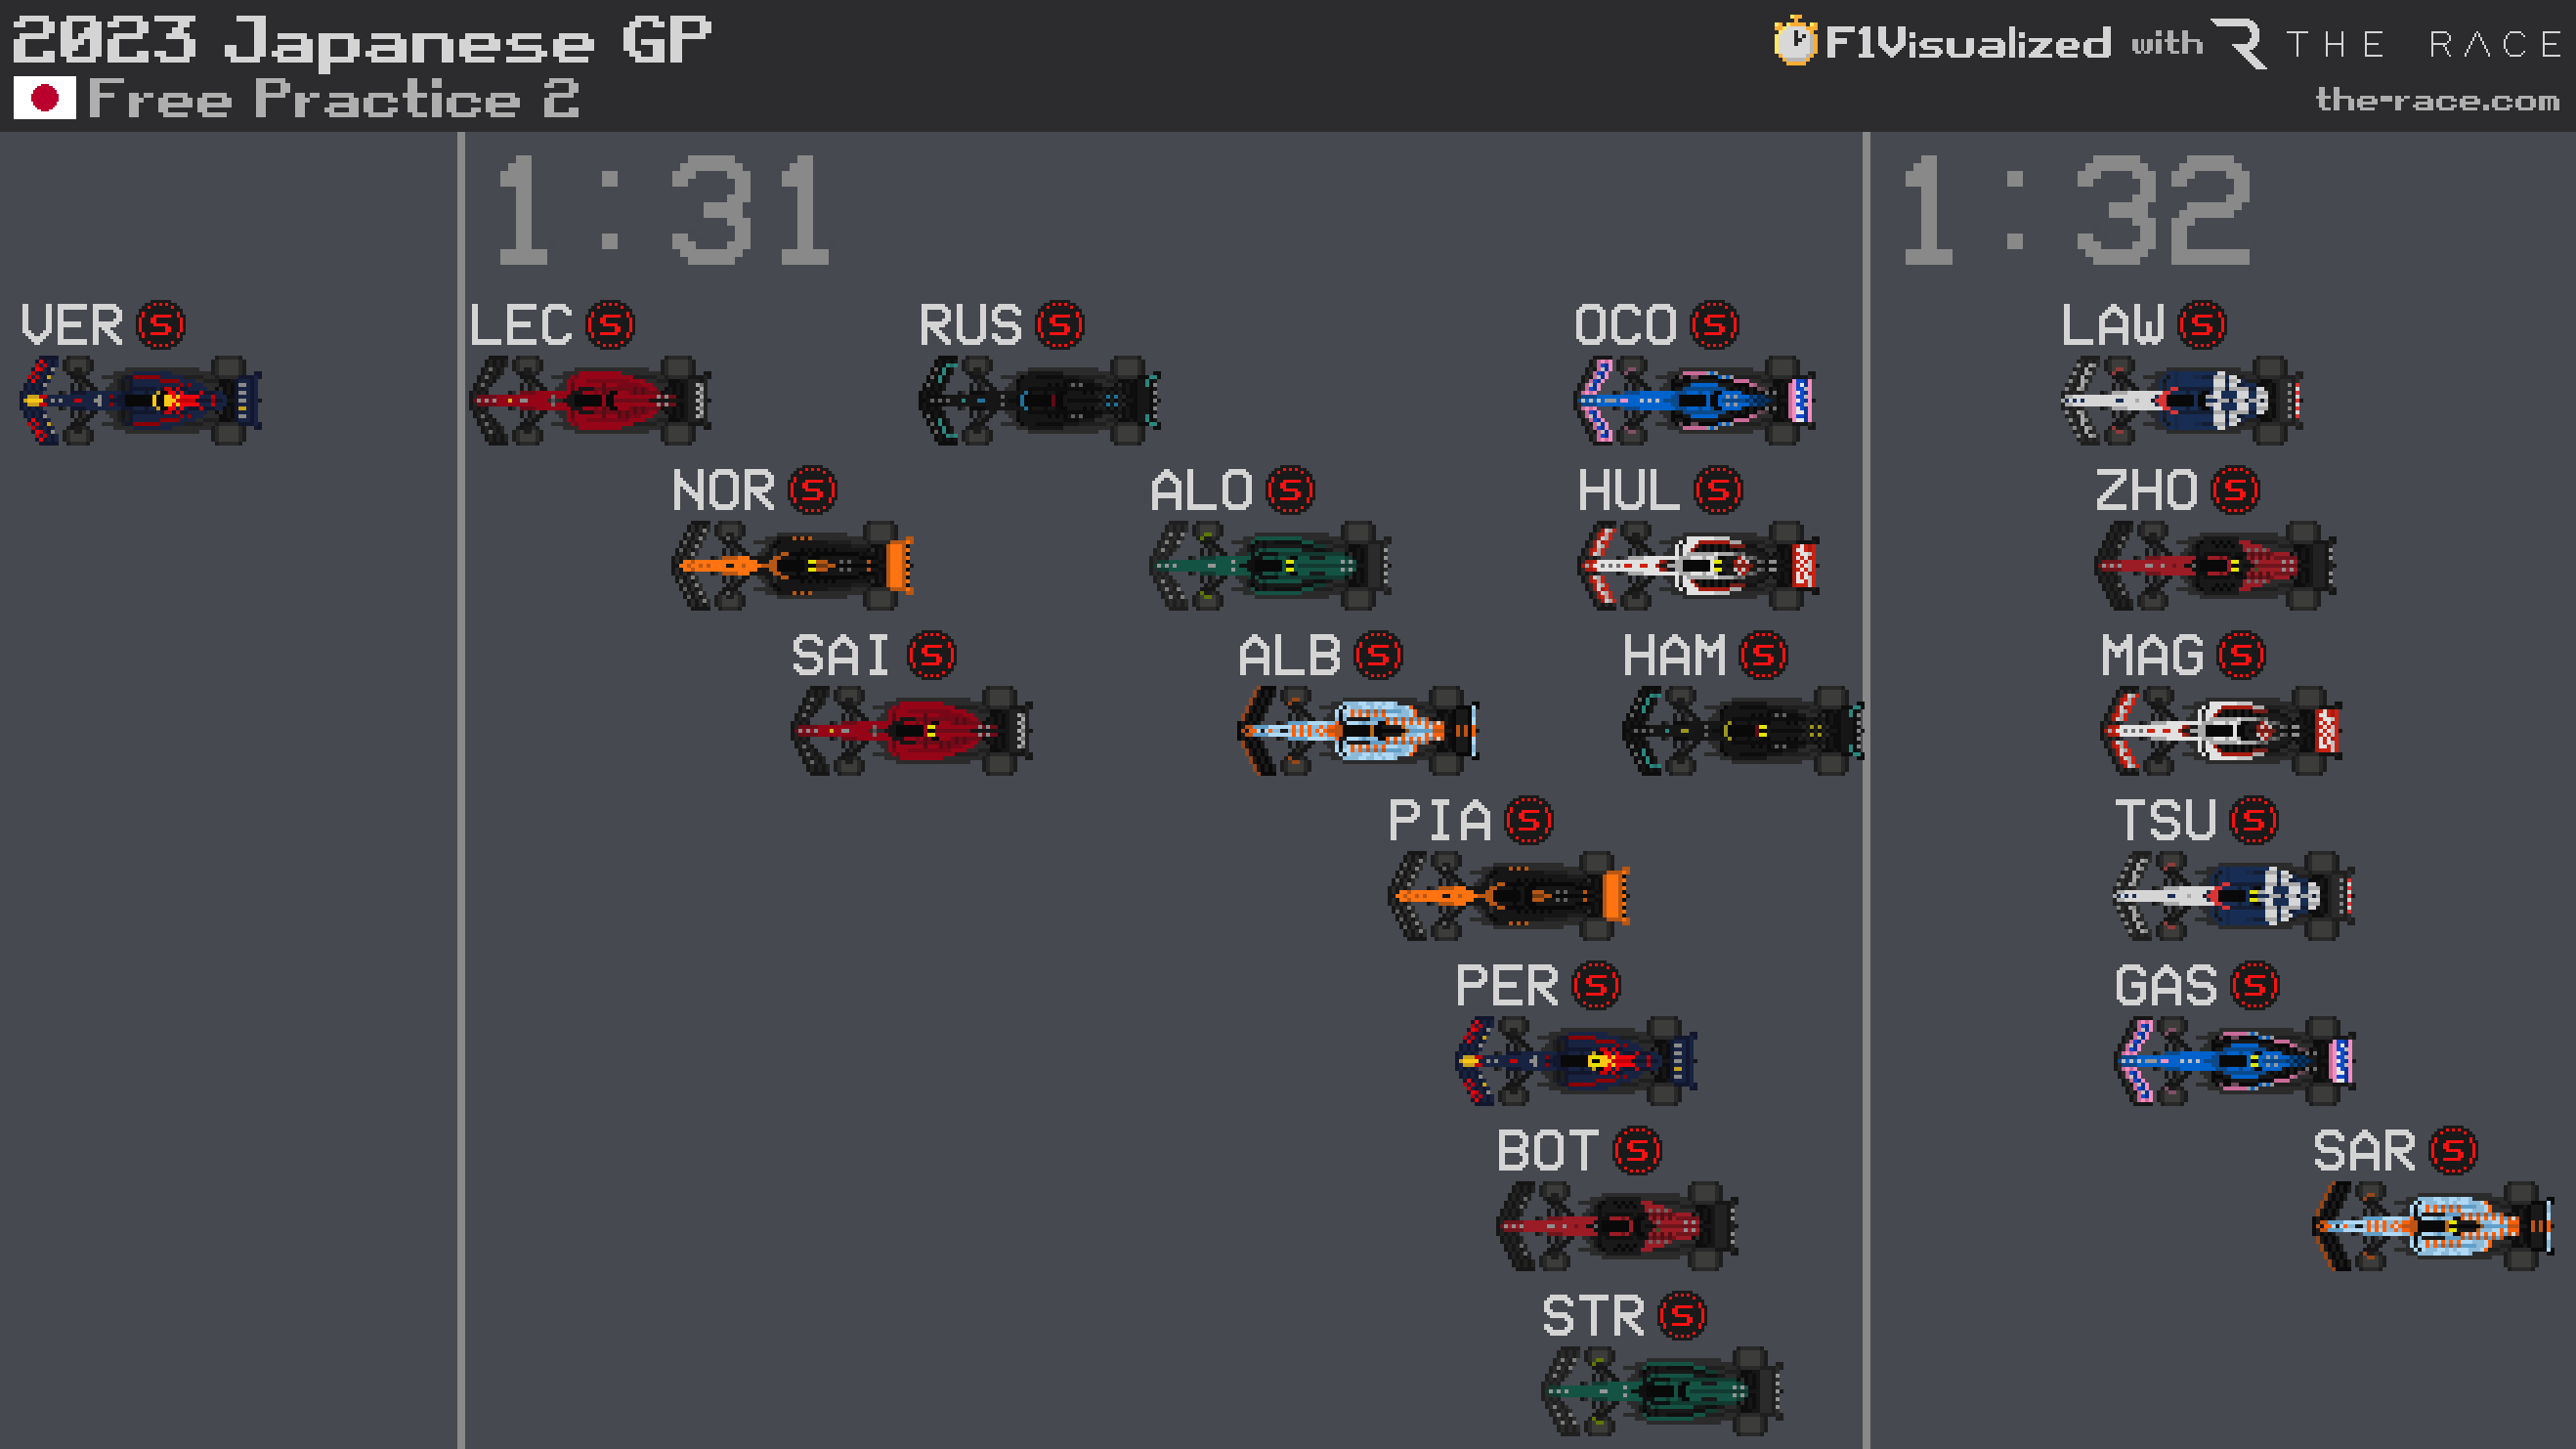 Japanese GP, FP2 results, F1Visualized